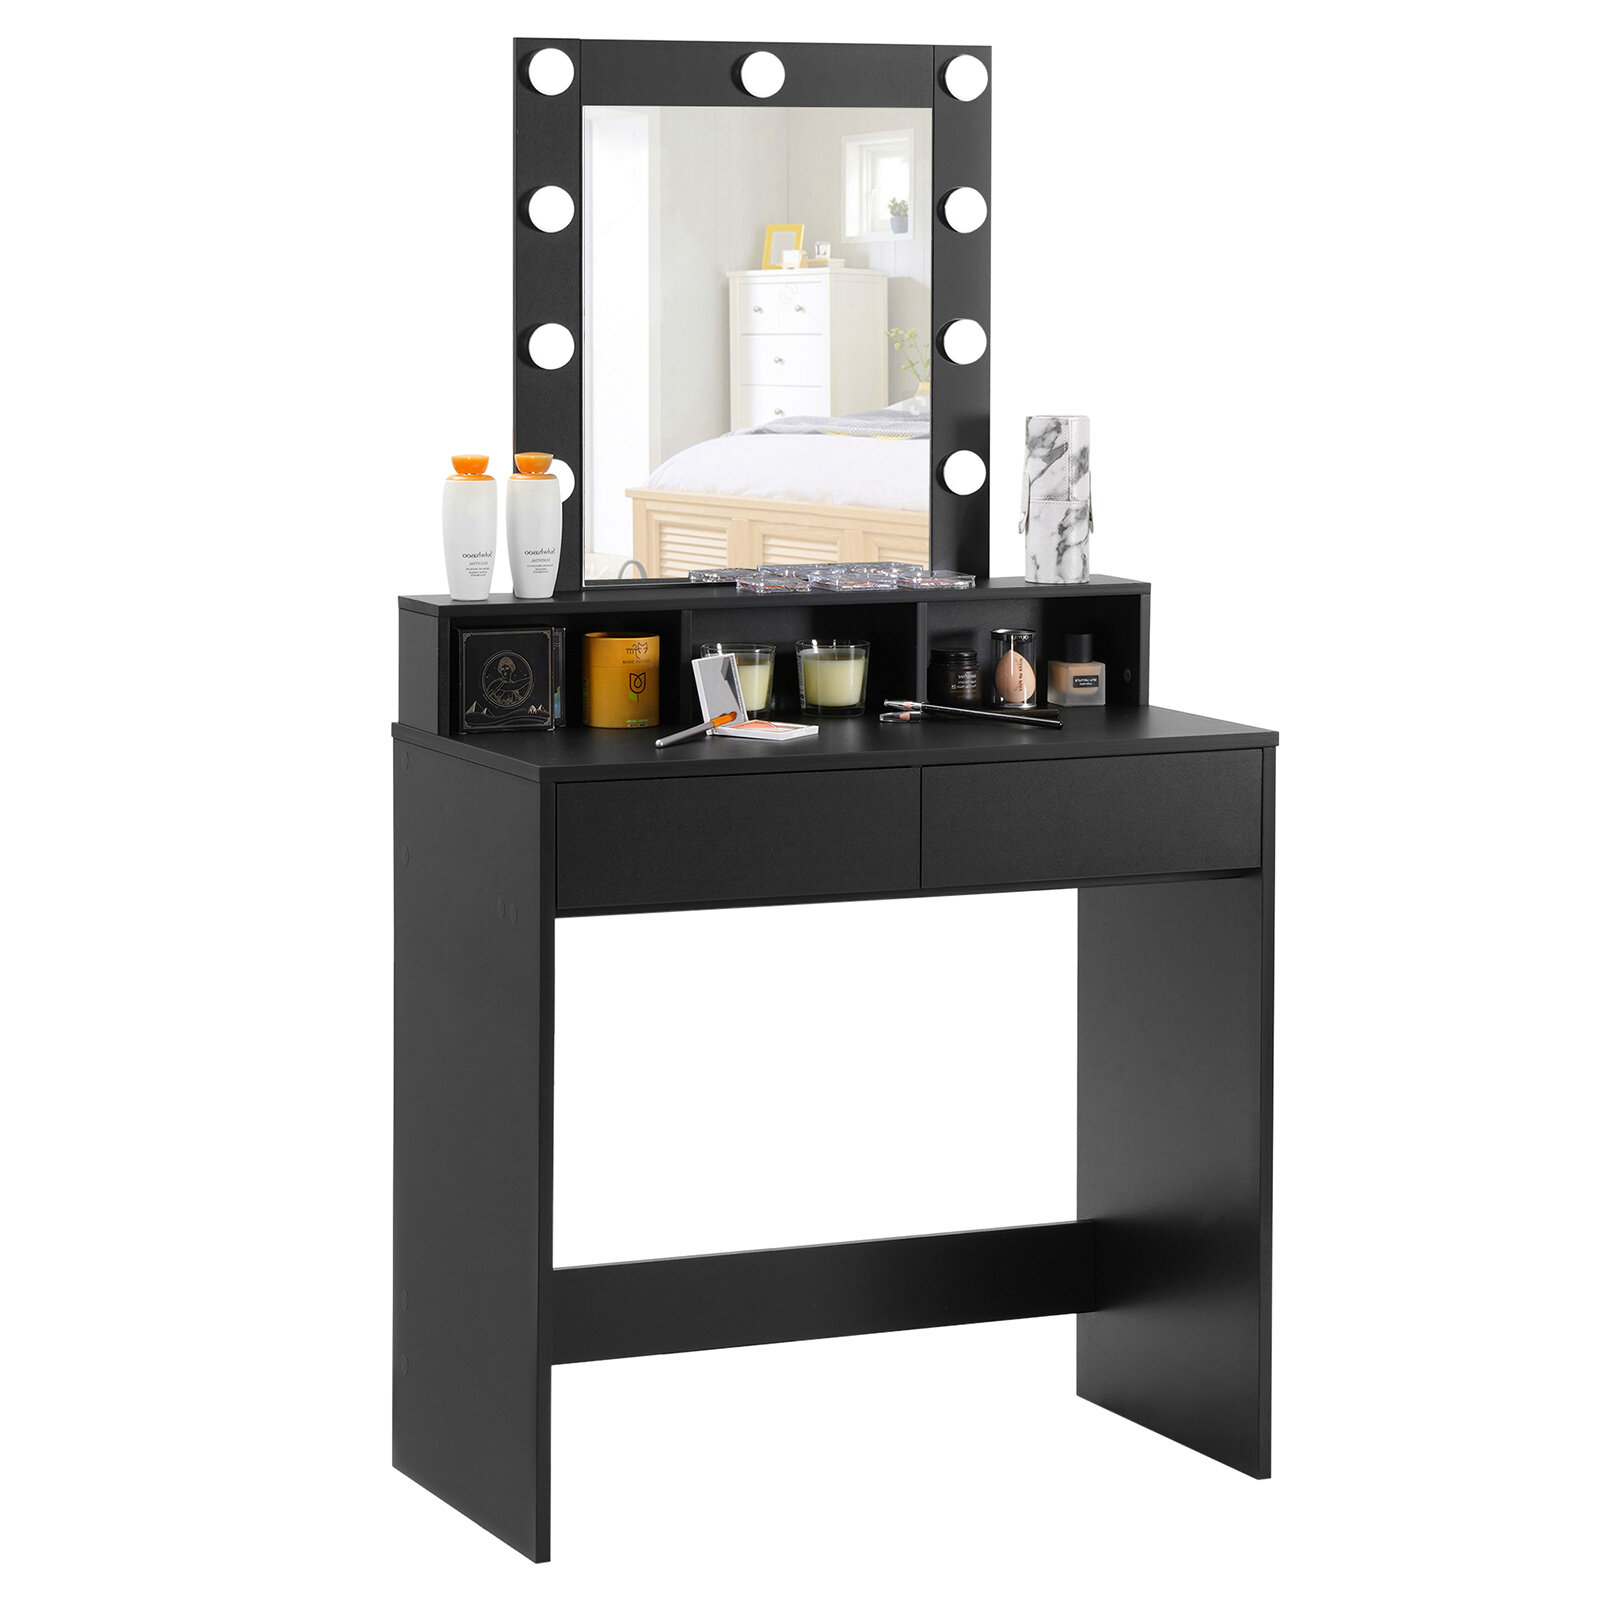 Latitude Run® Vanity Desk with Mirror and Lights,White Makeup